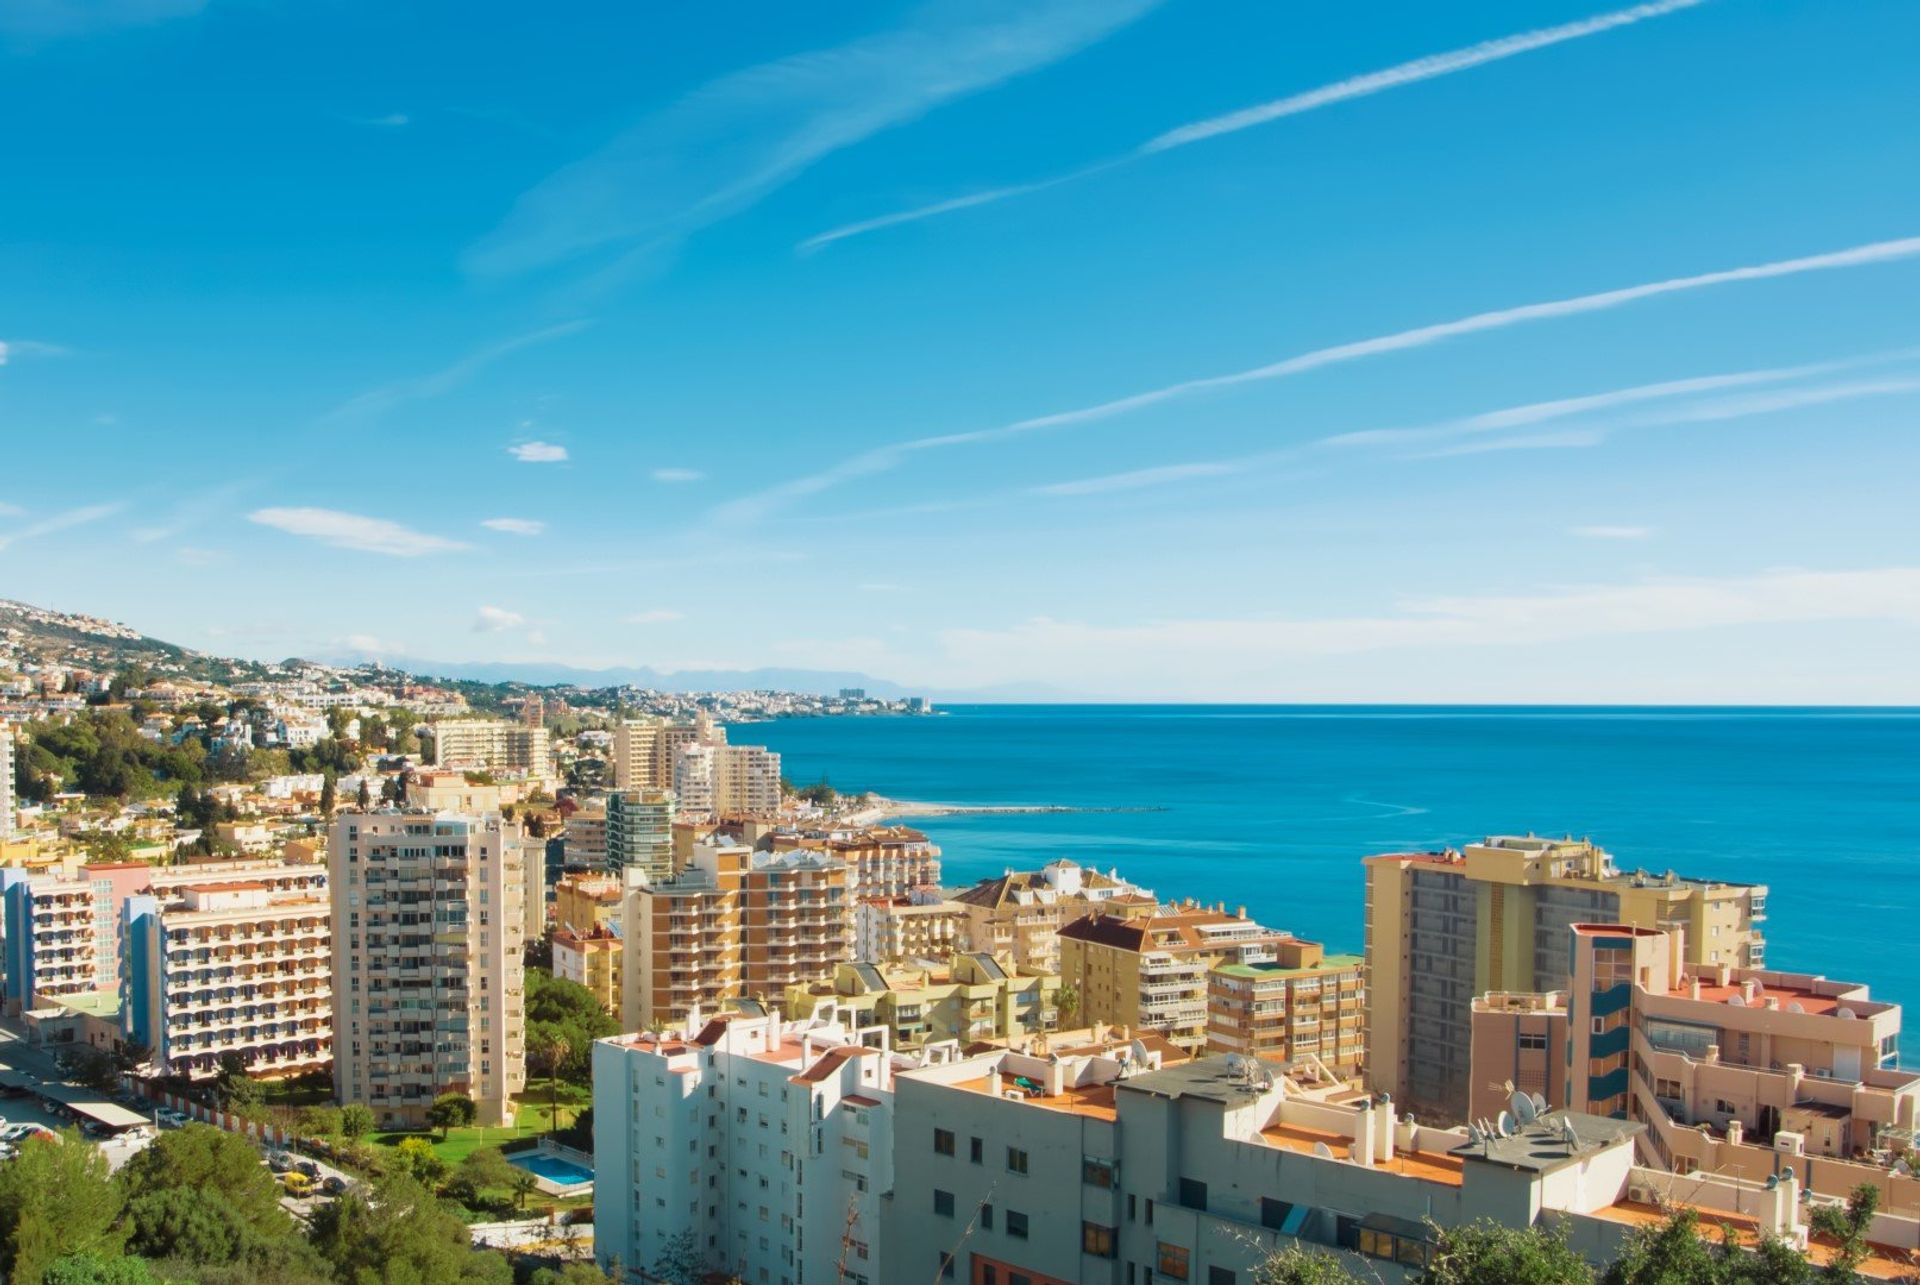 Take in the amazing views of sun-drenched Fuengirola and the sparkling Mediterranean